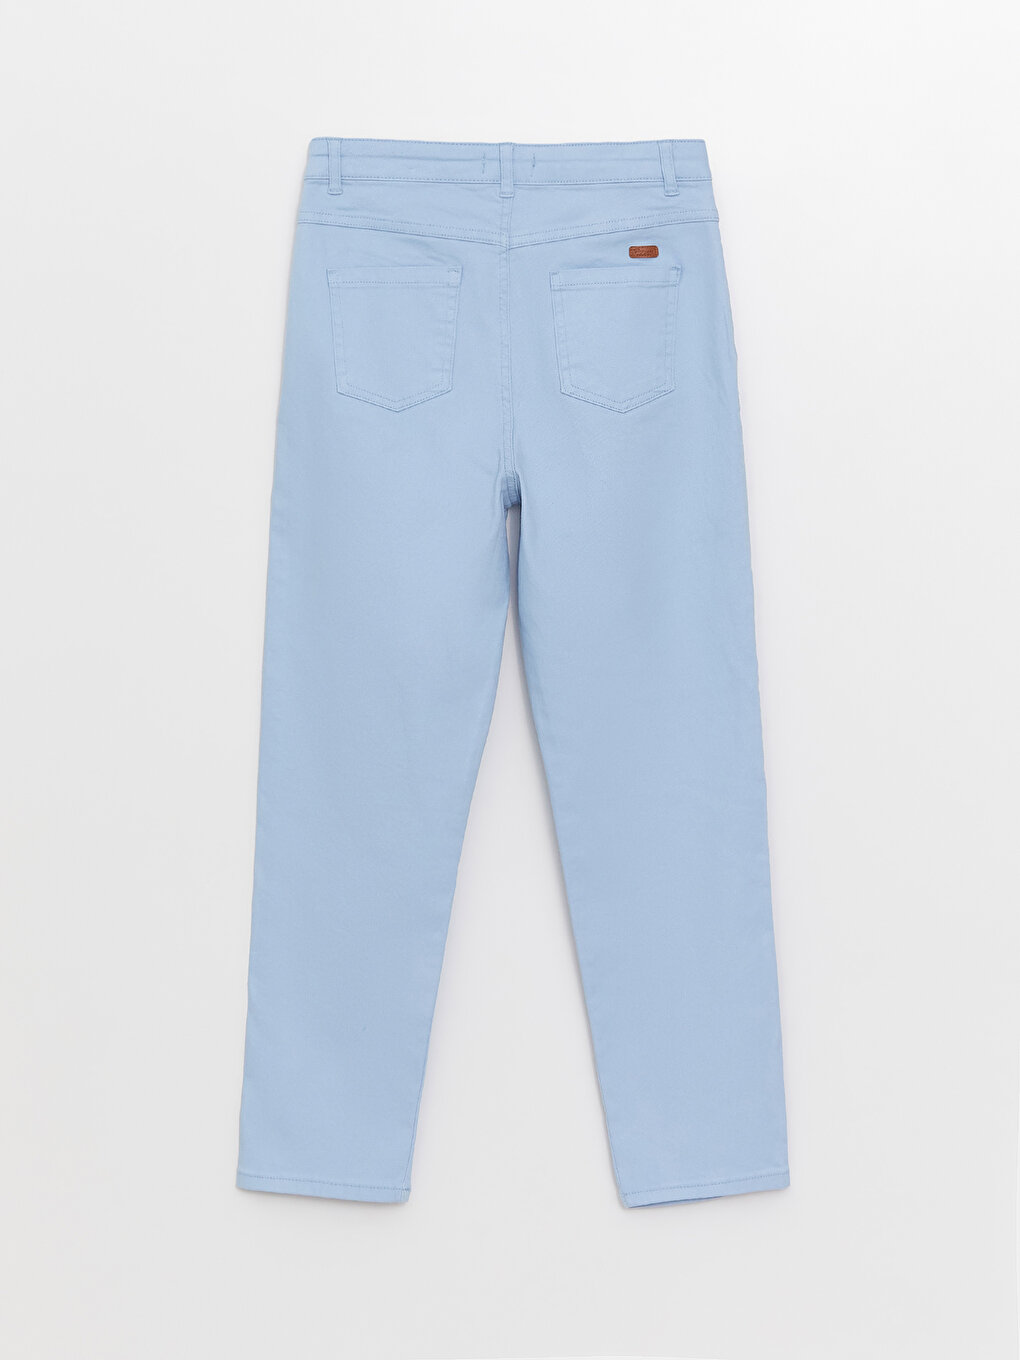 33 Best Light Blue Pants Outfits Images on Stylevore